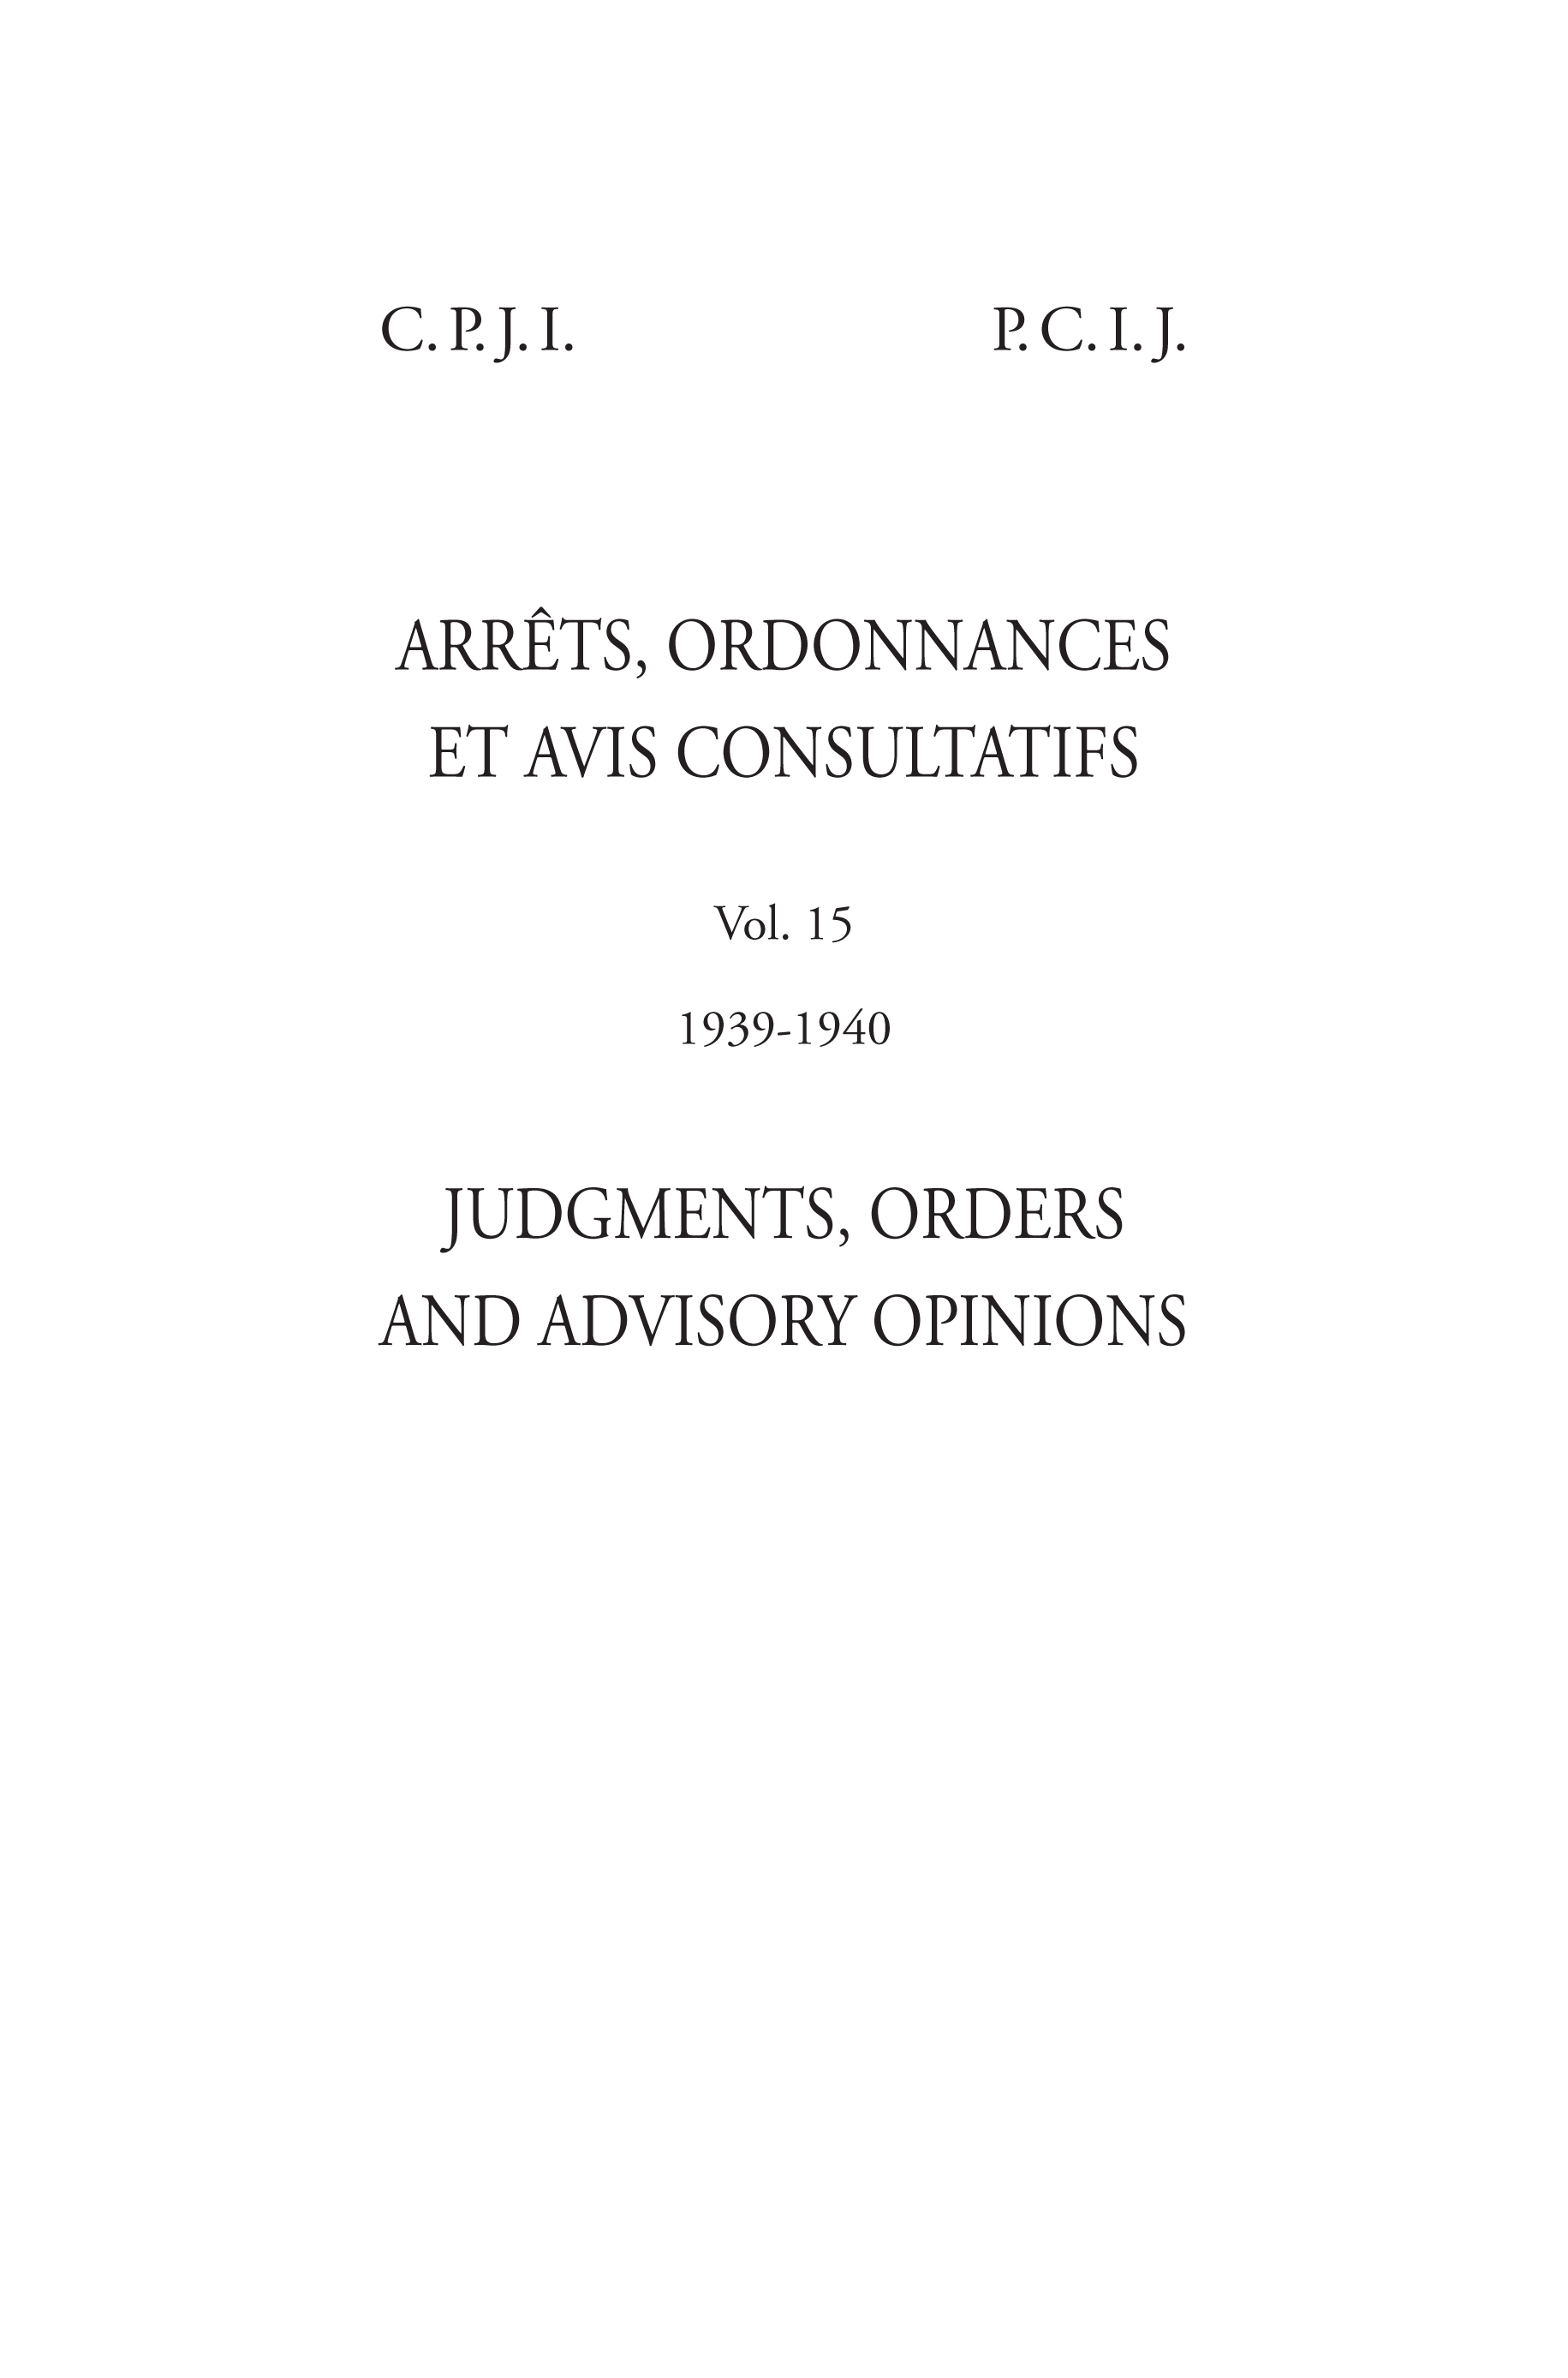 image of Judgments, Orders and Advisory Opinions: Vol.15, 1939-1940